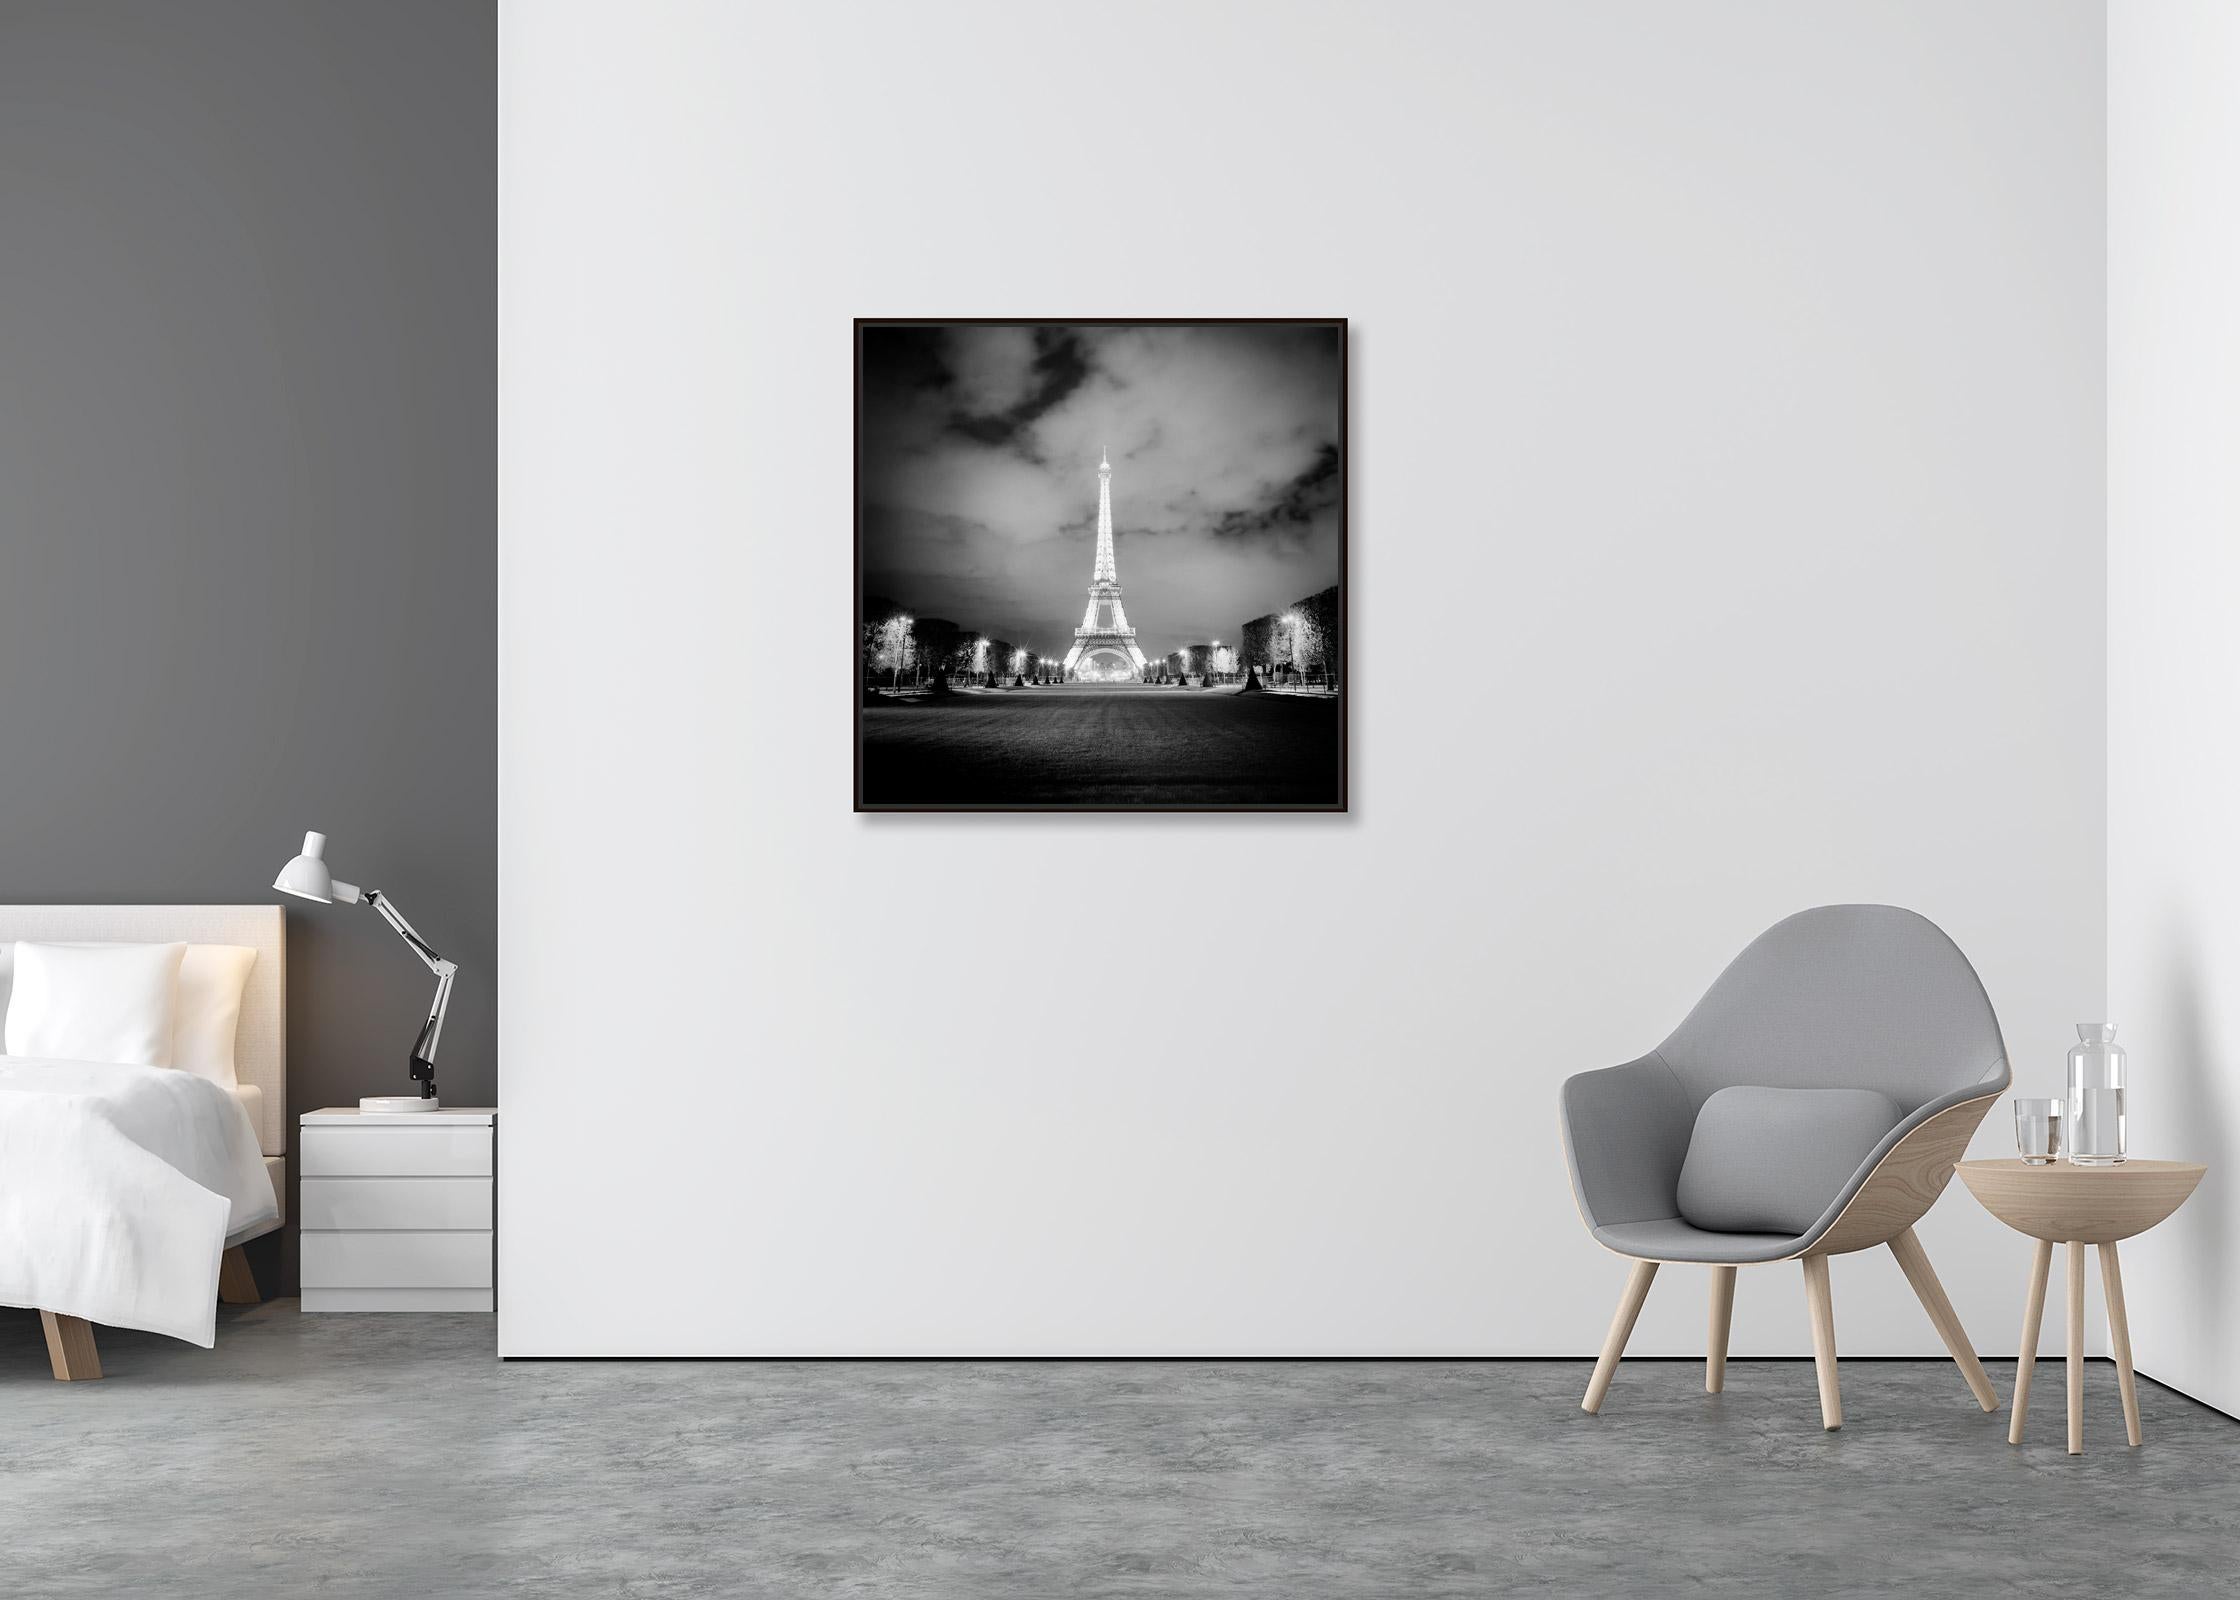 Eiffel Tower, Night, Paris, light show, black and white photography, cityscape - Contemporary Photograph by Gerald Berghammer